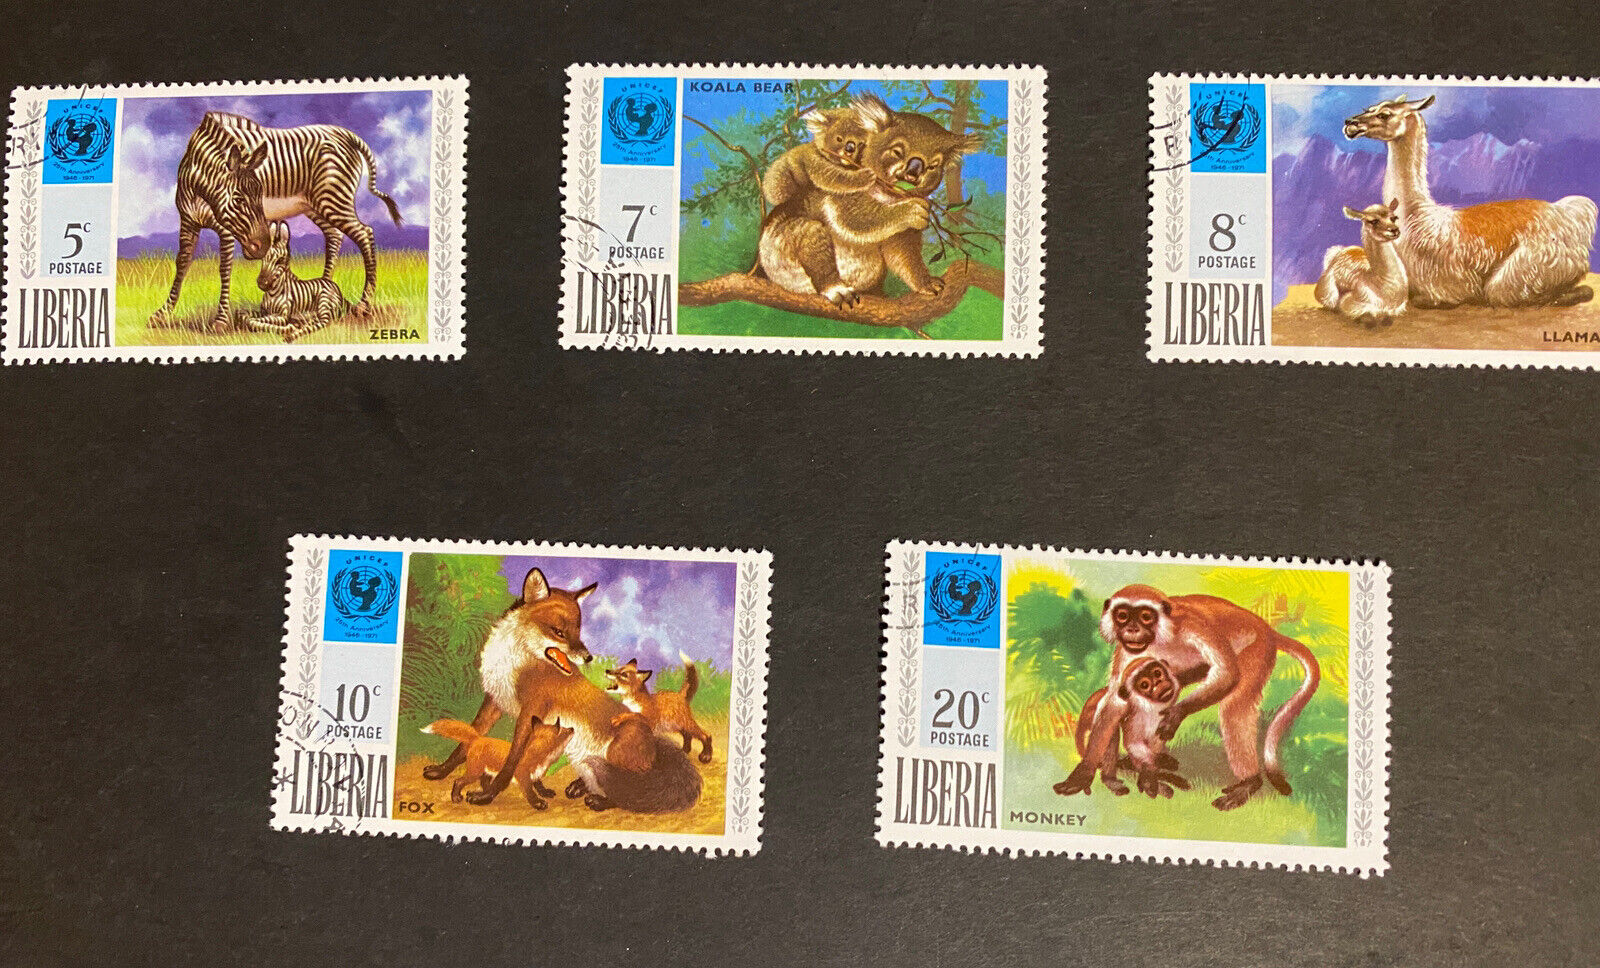 LIBERIA 25TH ANNIVERSARY UNICEF ANIMAL STAMPS 1946-1971 CTO FIVE LARGE STAMPS